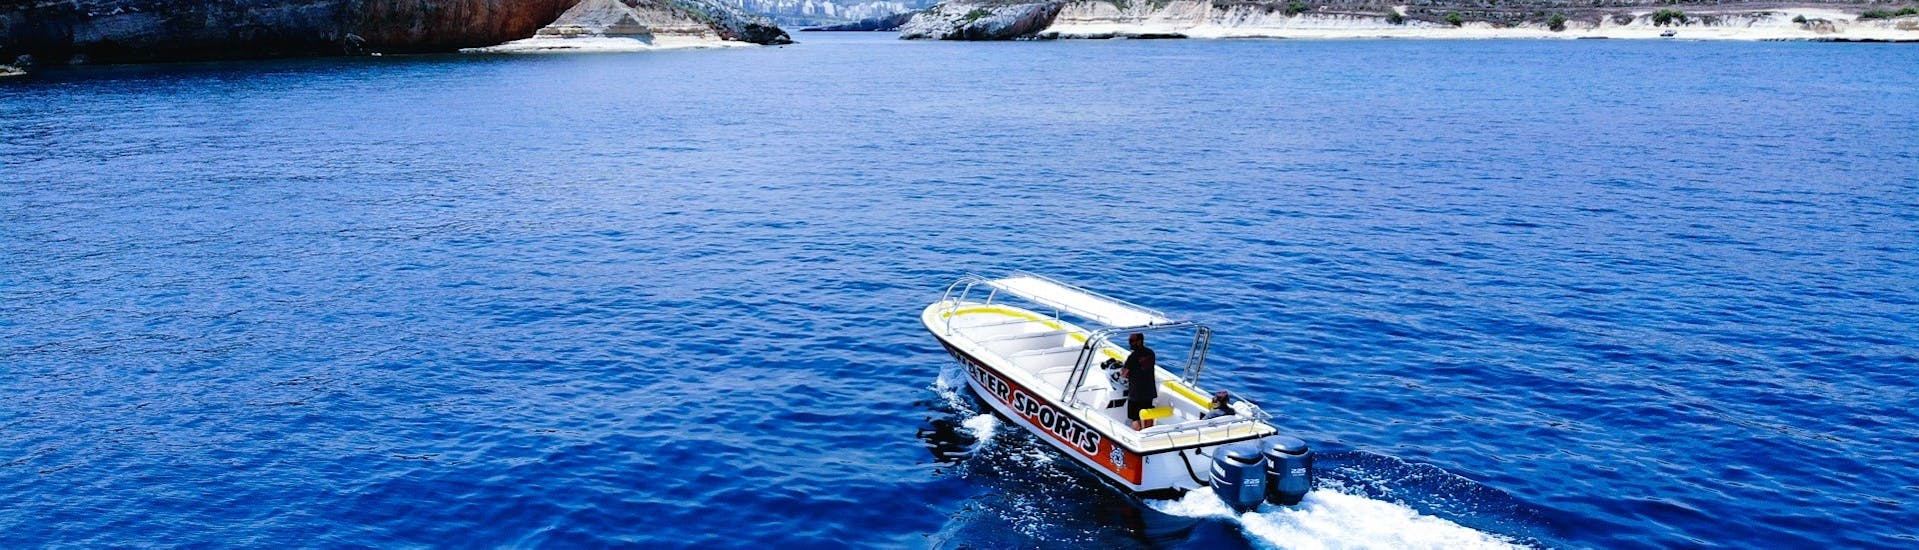 Our boat ready for the Boat Trip from Qawra to southern Malta with Swimming Stop with Whyknot Cruises Malta.